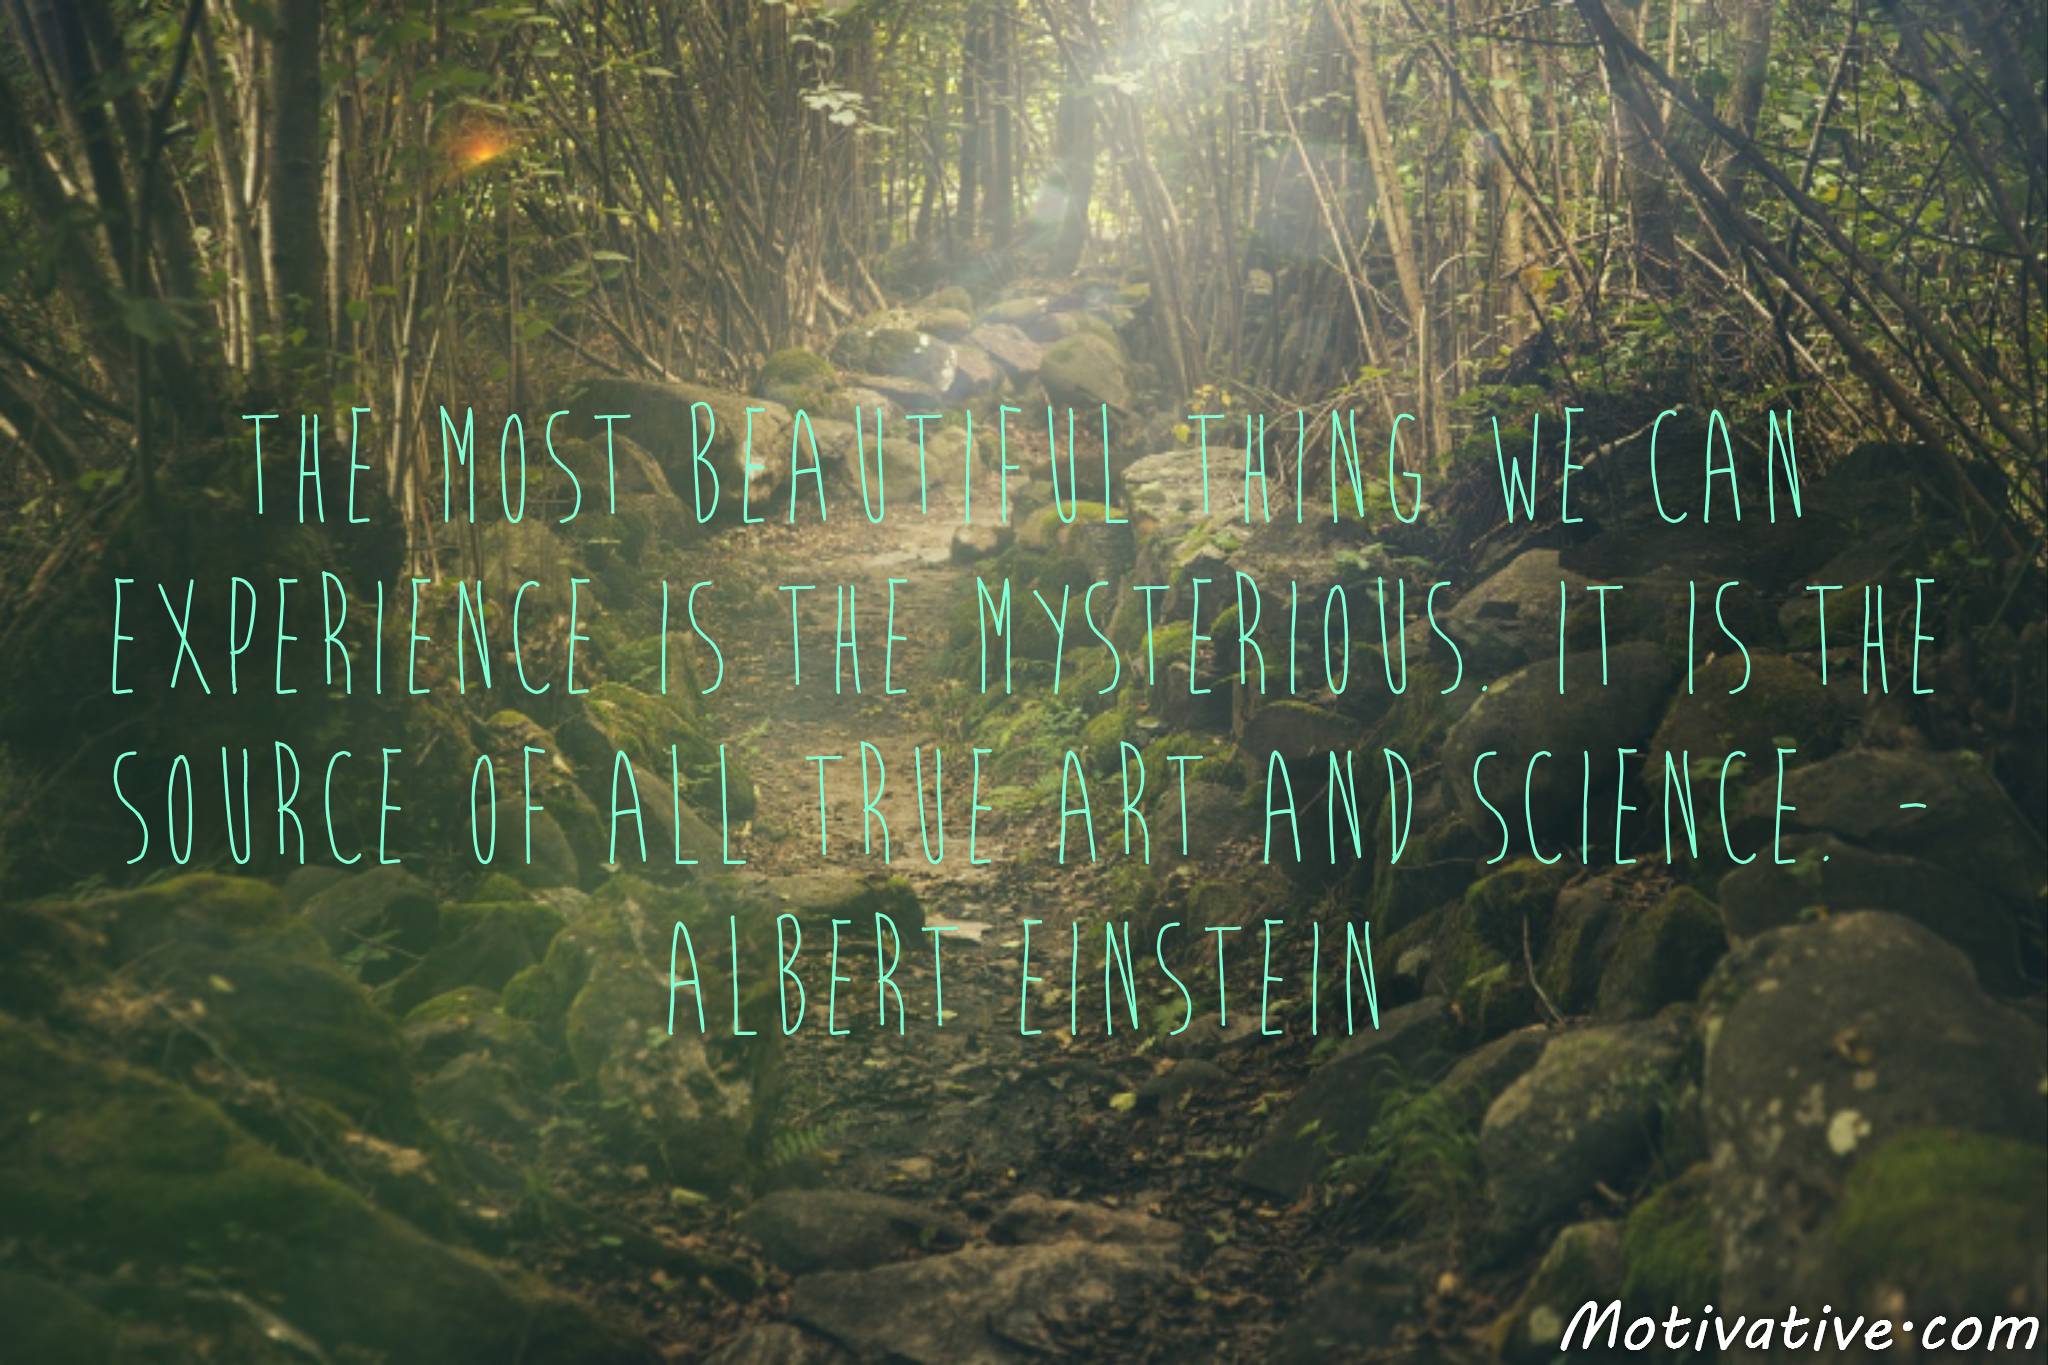 The most beautiful thing we can experience is the mysterious. It is the source of all true art and science. – Albert Einstein